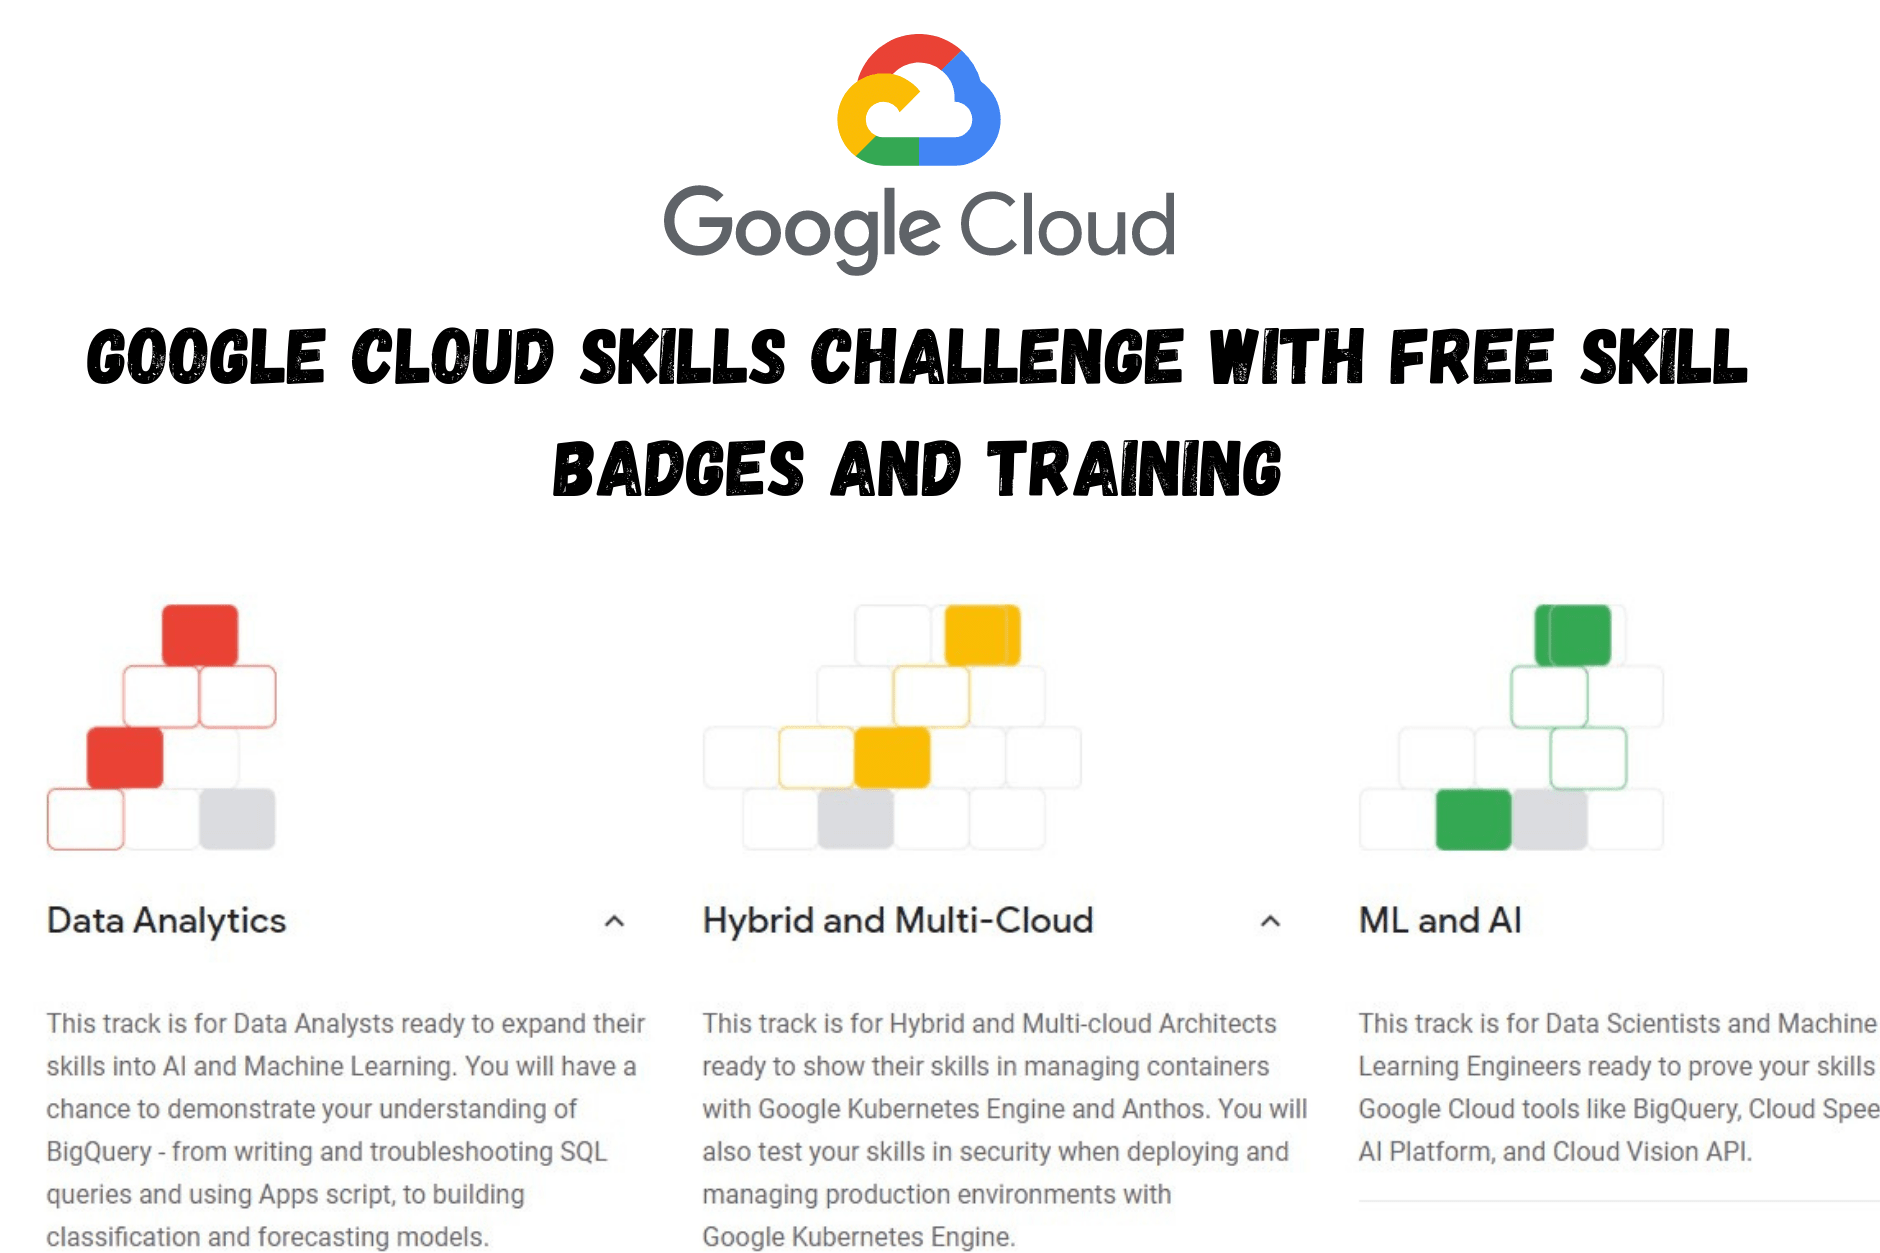 Google Cloud Skills Challenge with Free skill badges and training